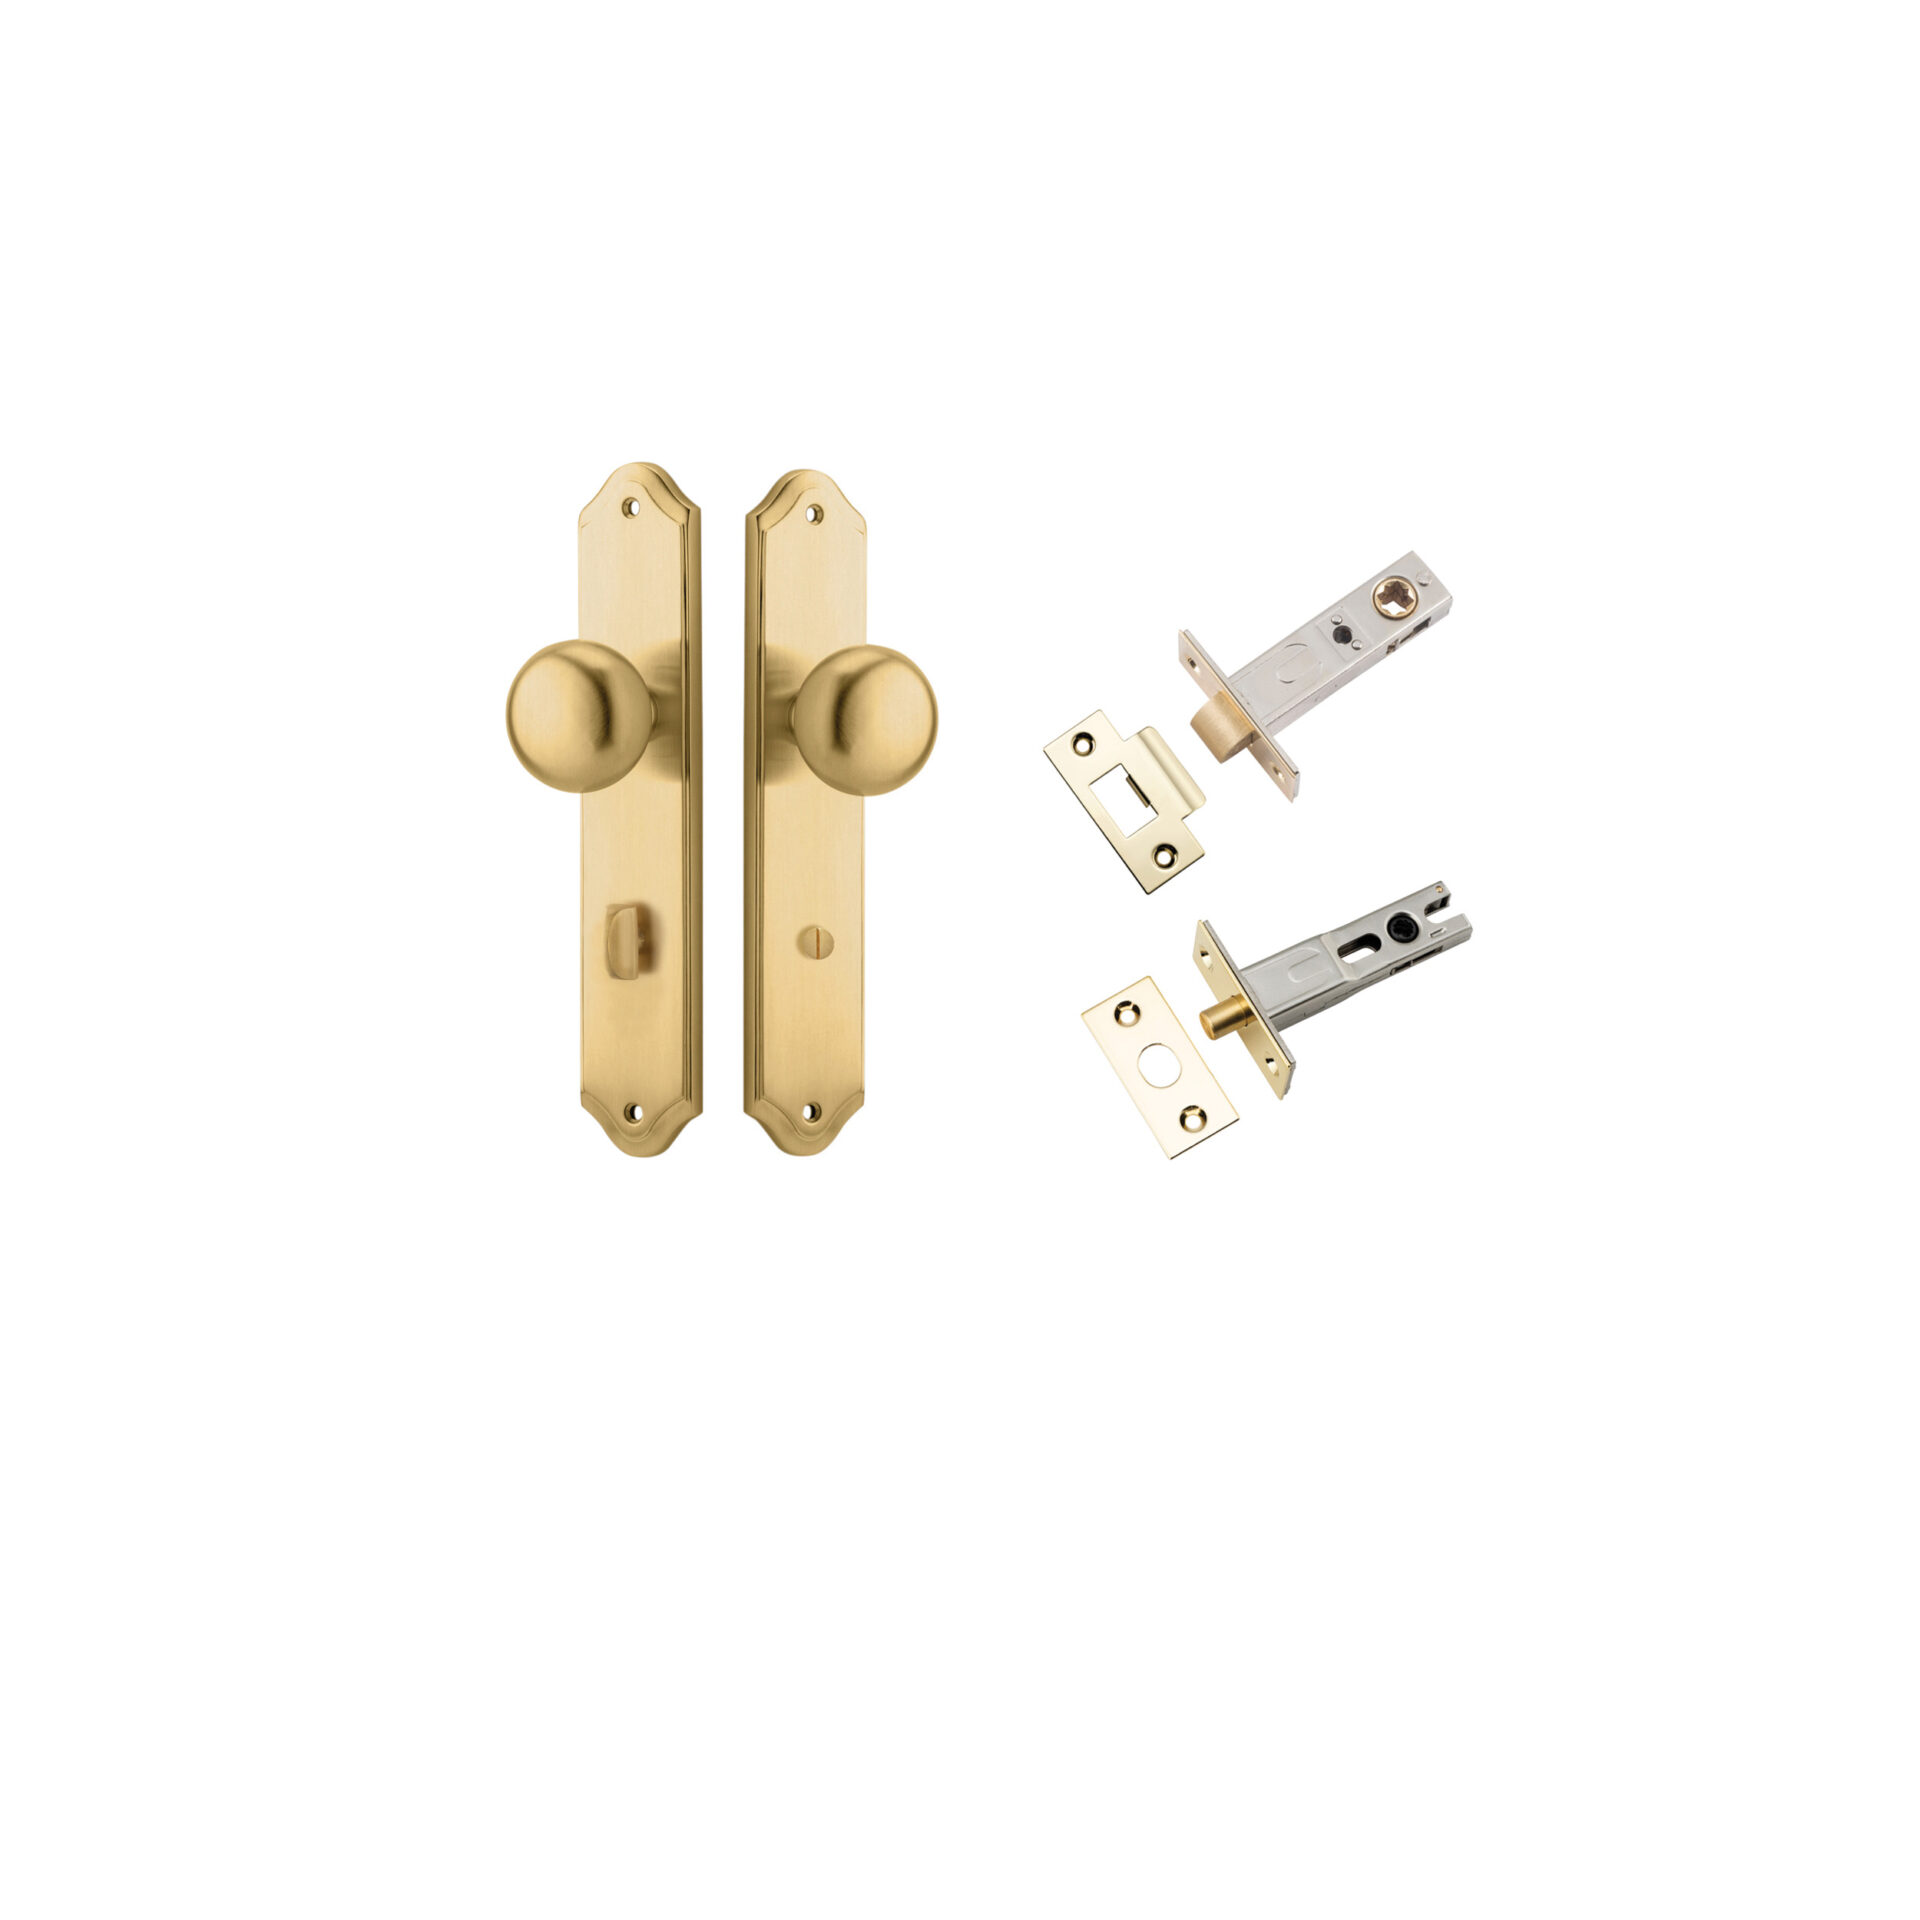 15328KPRIV60 - Cambridge Knob - Shouldered Backplate Privacy Kit with Privacy Turn - Brushed Brass - Privacy